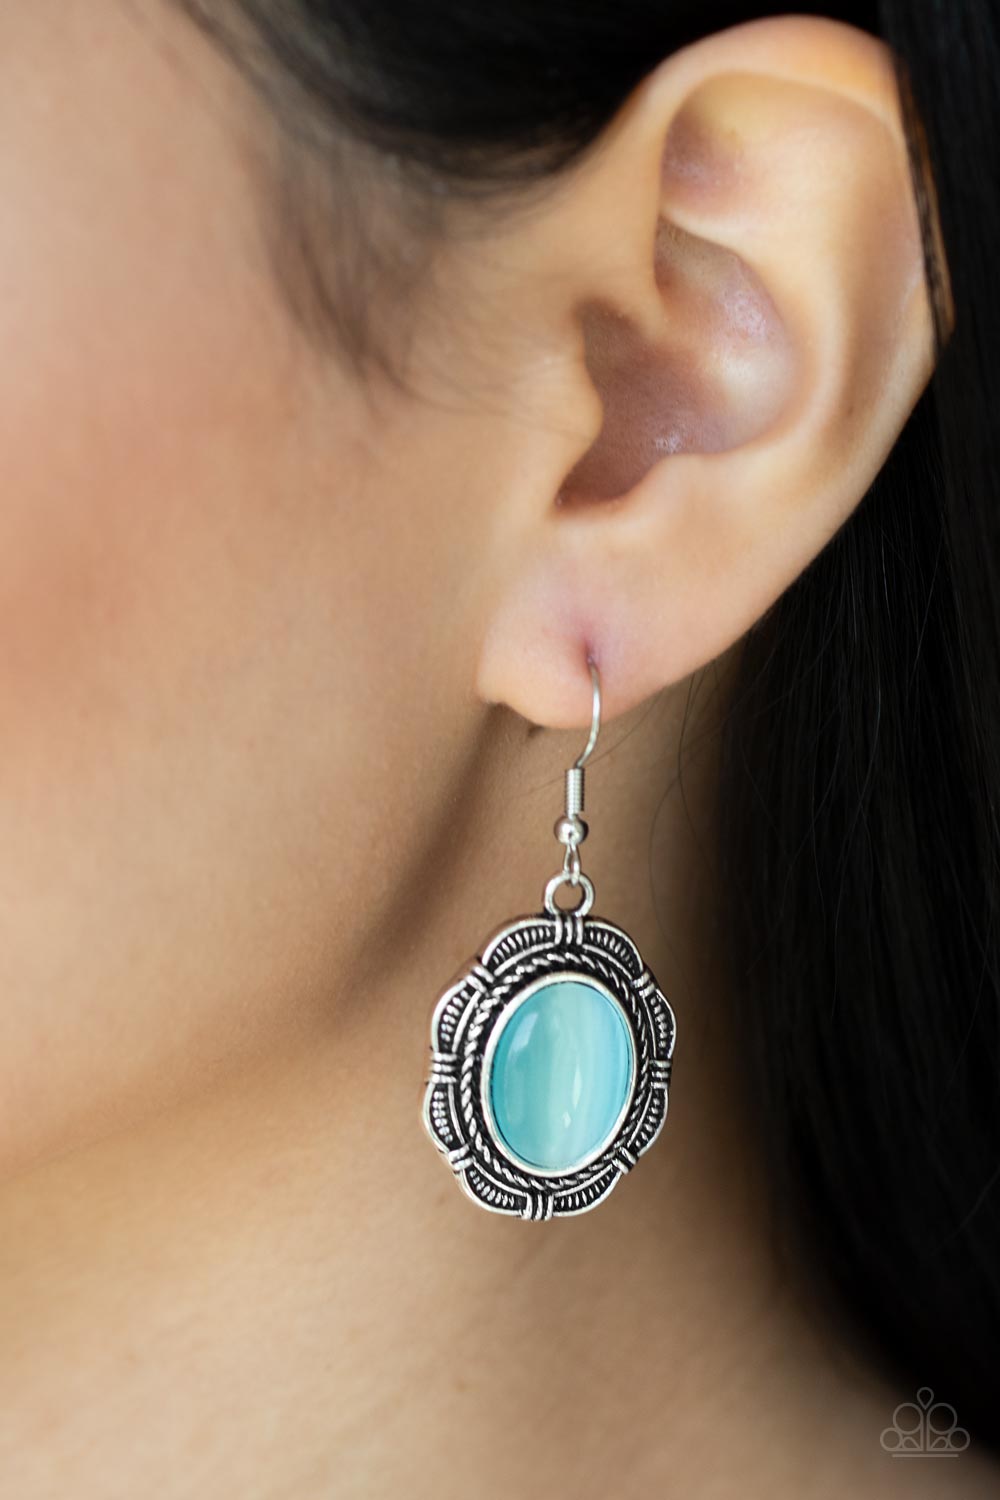 Garden Party Perfection Blue Cat's Eye Stone Earrings - Paparazzi Accessories- lightbox - CarasShop.com - $5 Jewelry by Cara Jewels